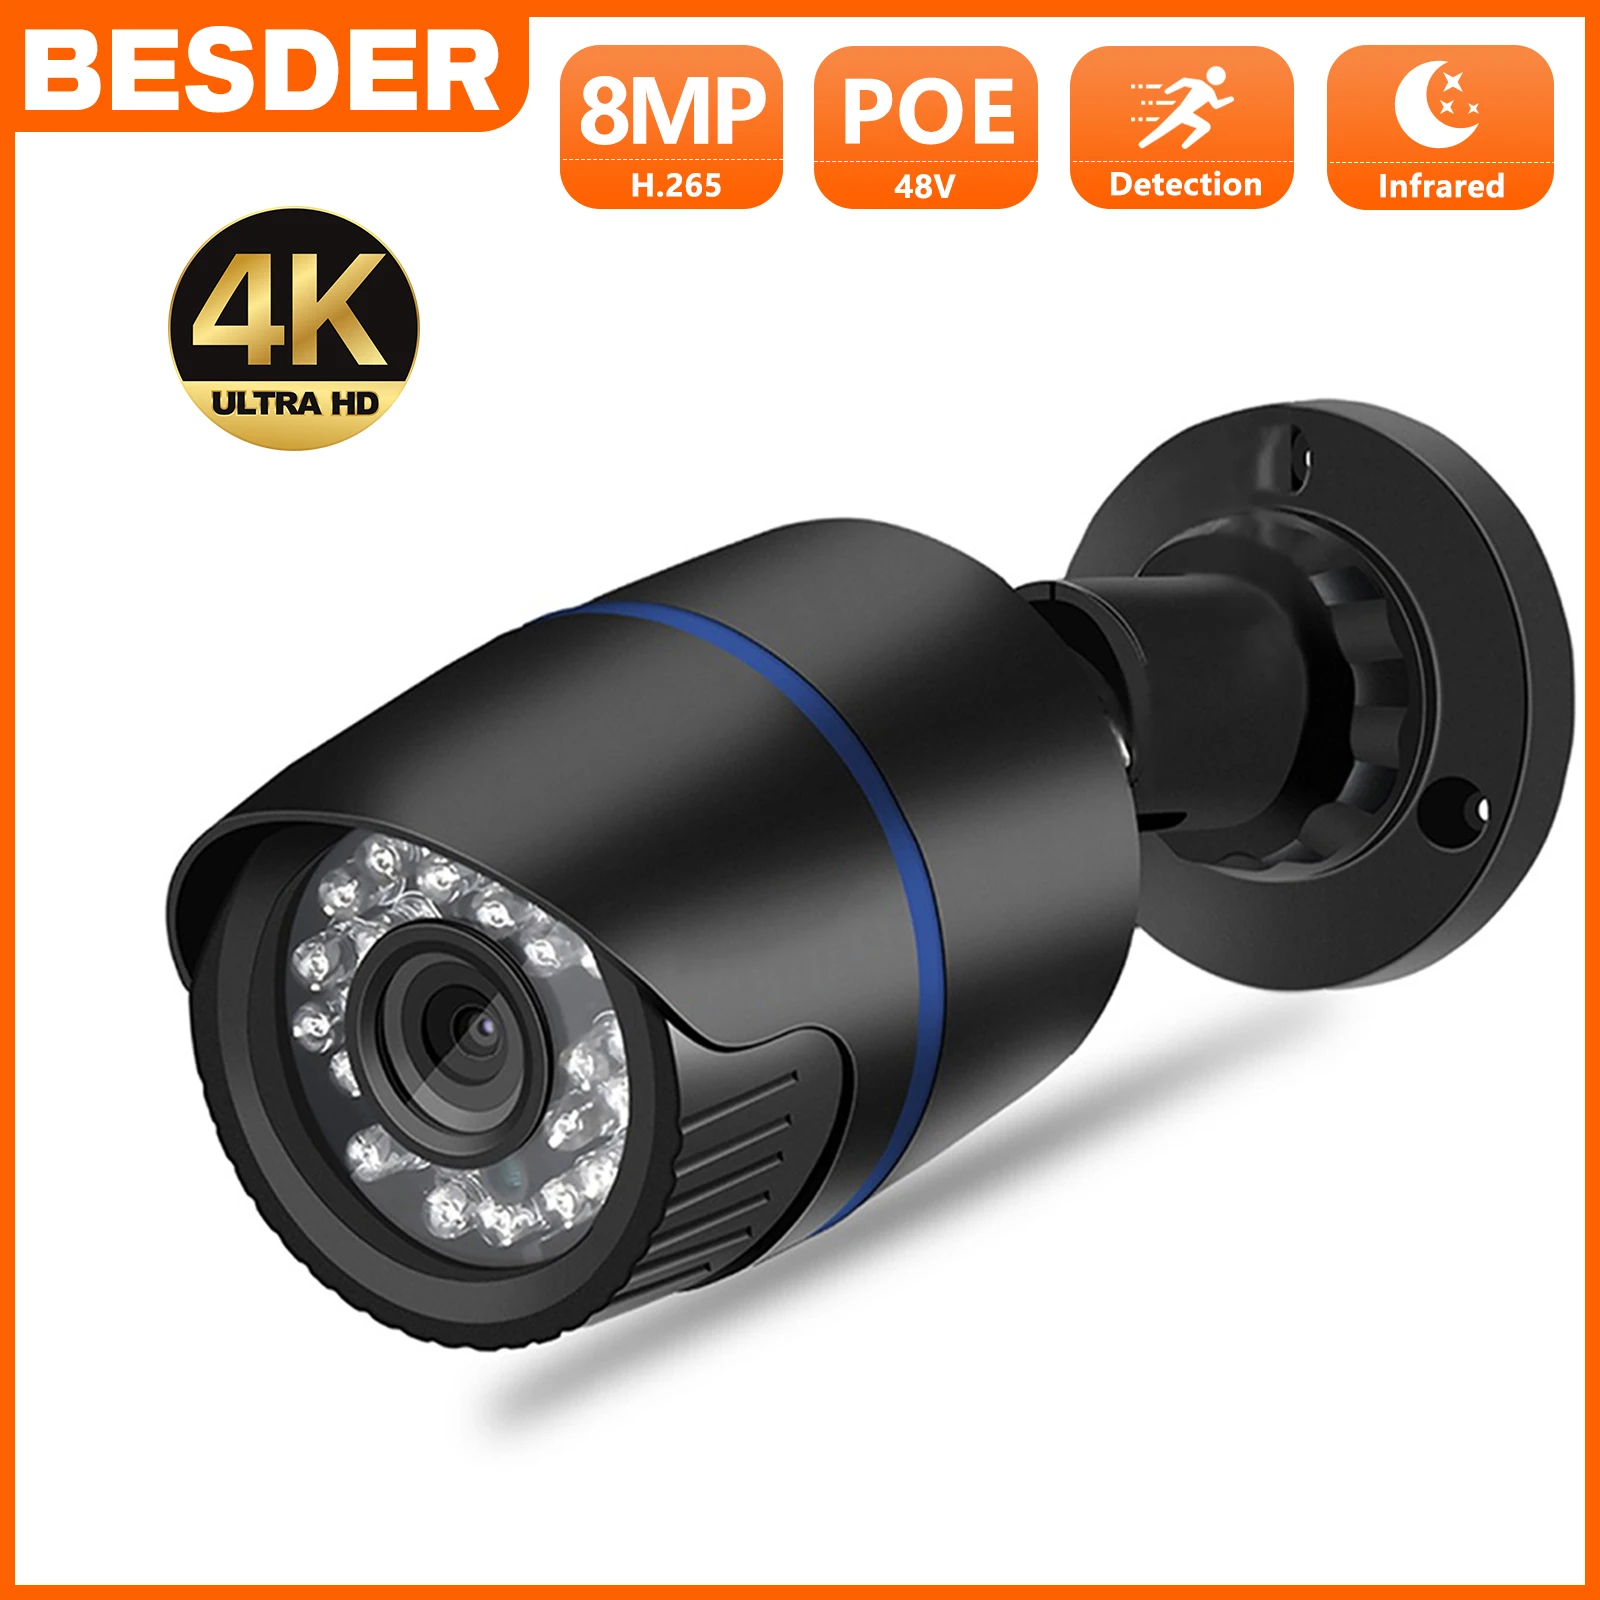 BESDER 8MP 4K Outdoor IP Camera 48V Poe 4MP Waterproof Plastic Shell Motion Detect P2P Bullet XMEye Wired CCTV Security Camera